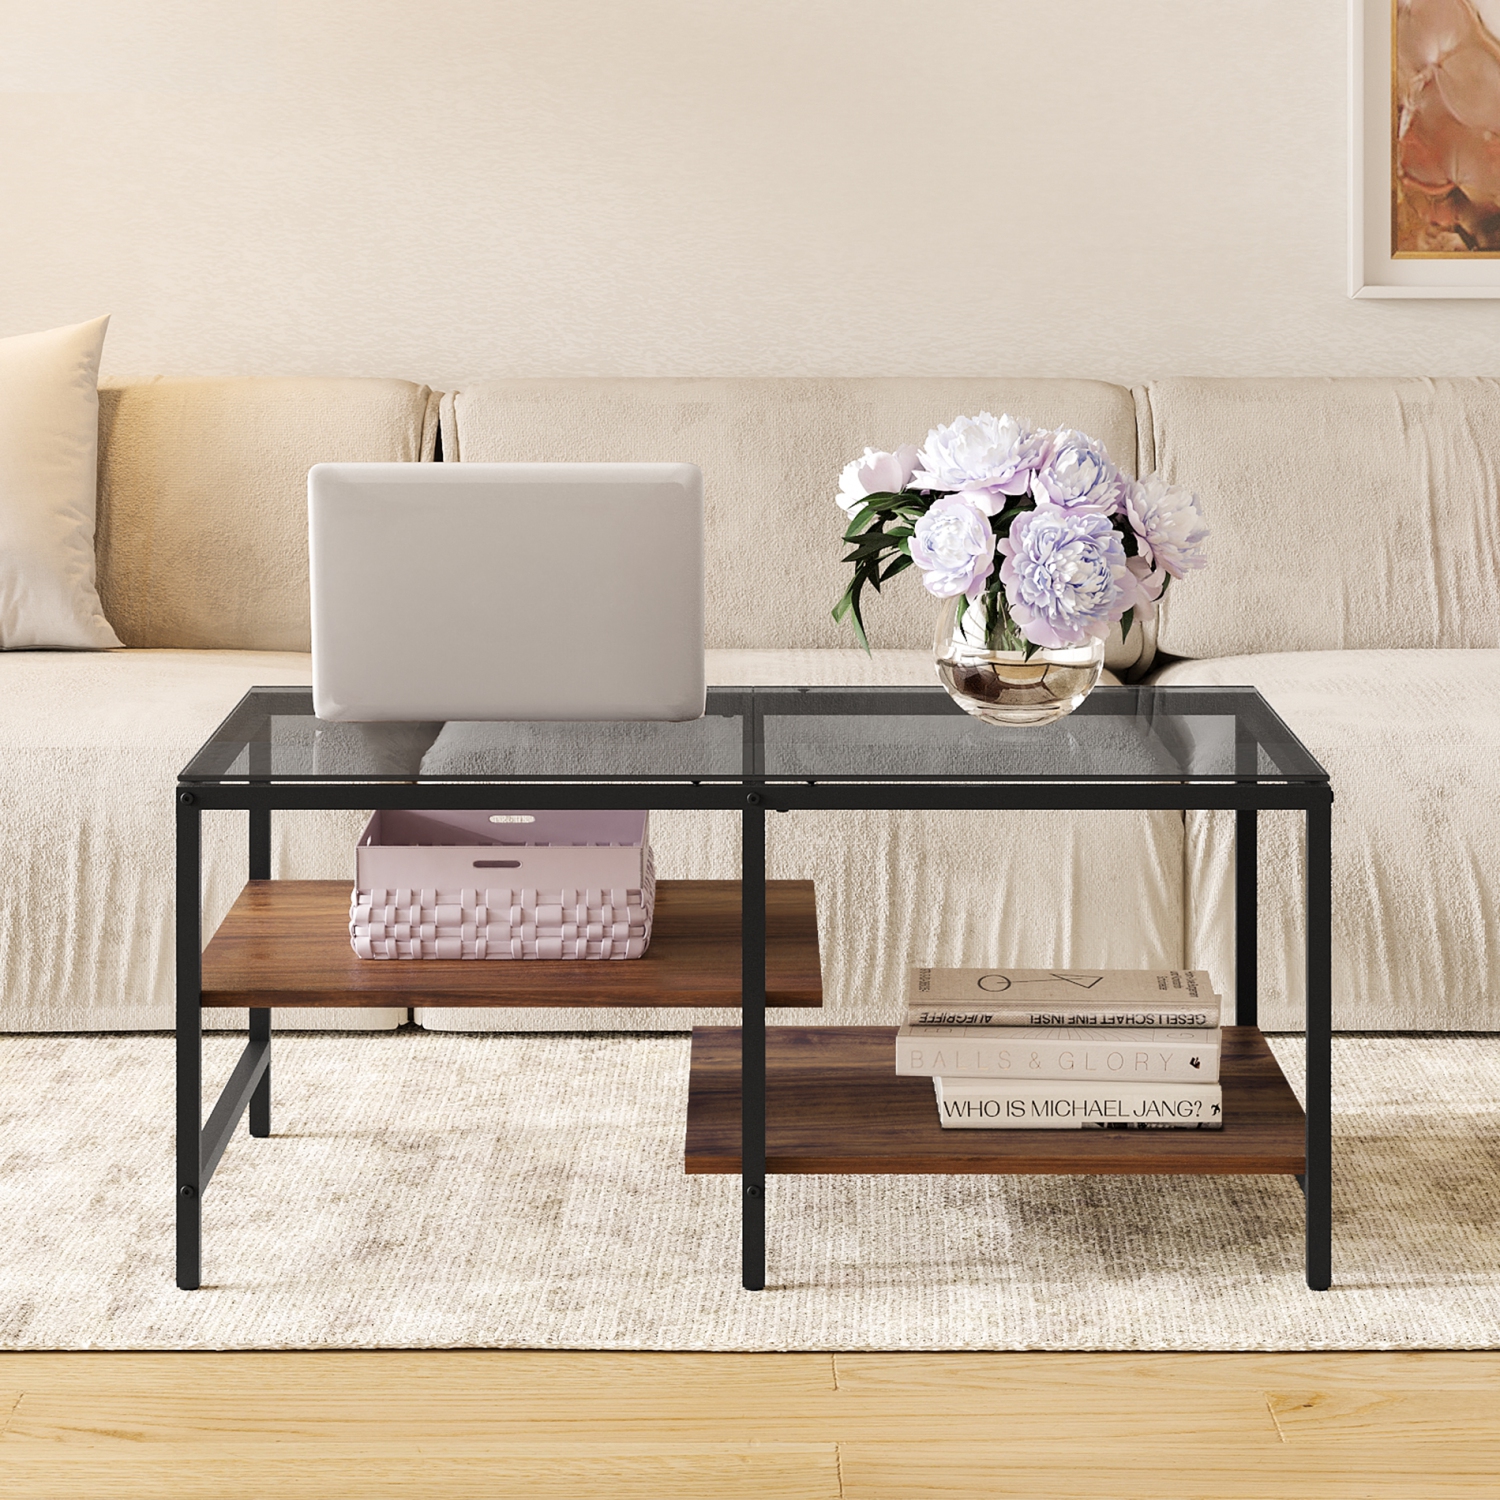 HOMOOI Glass Wood Coffee Table with 2-Tier Staggered Shelves - Farmhouse Tea Center Table with Smoked Grey Tempered Glass for Living Room, 40", Walnut